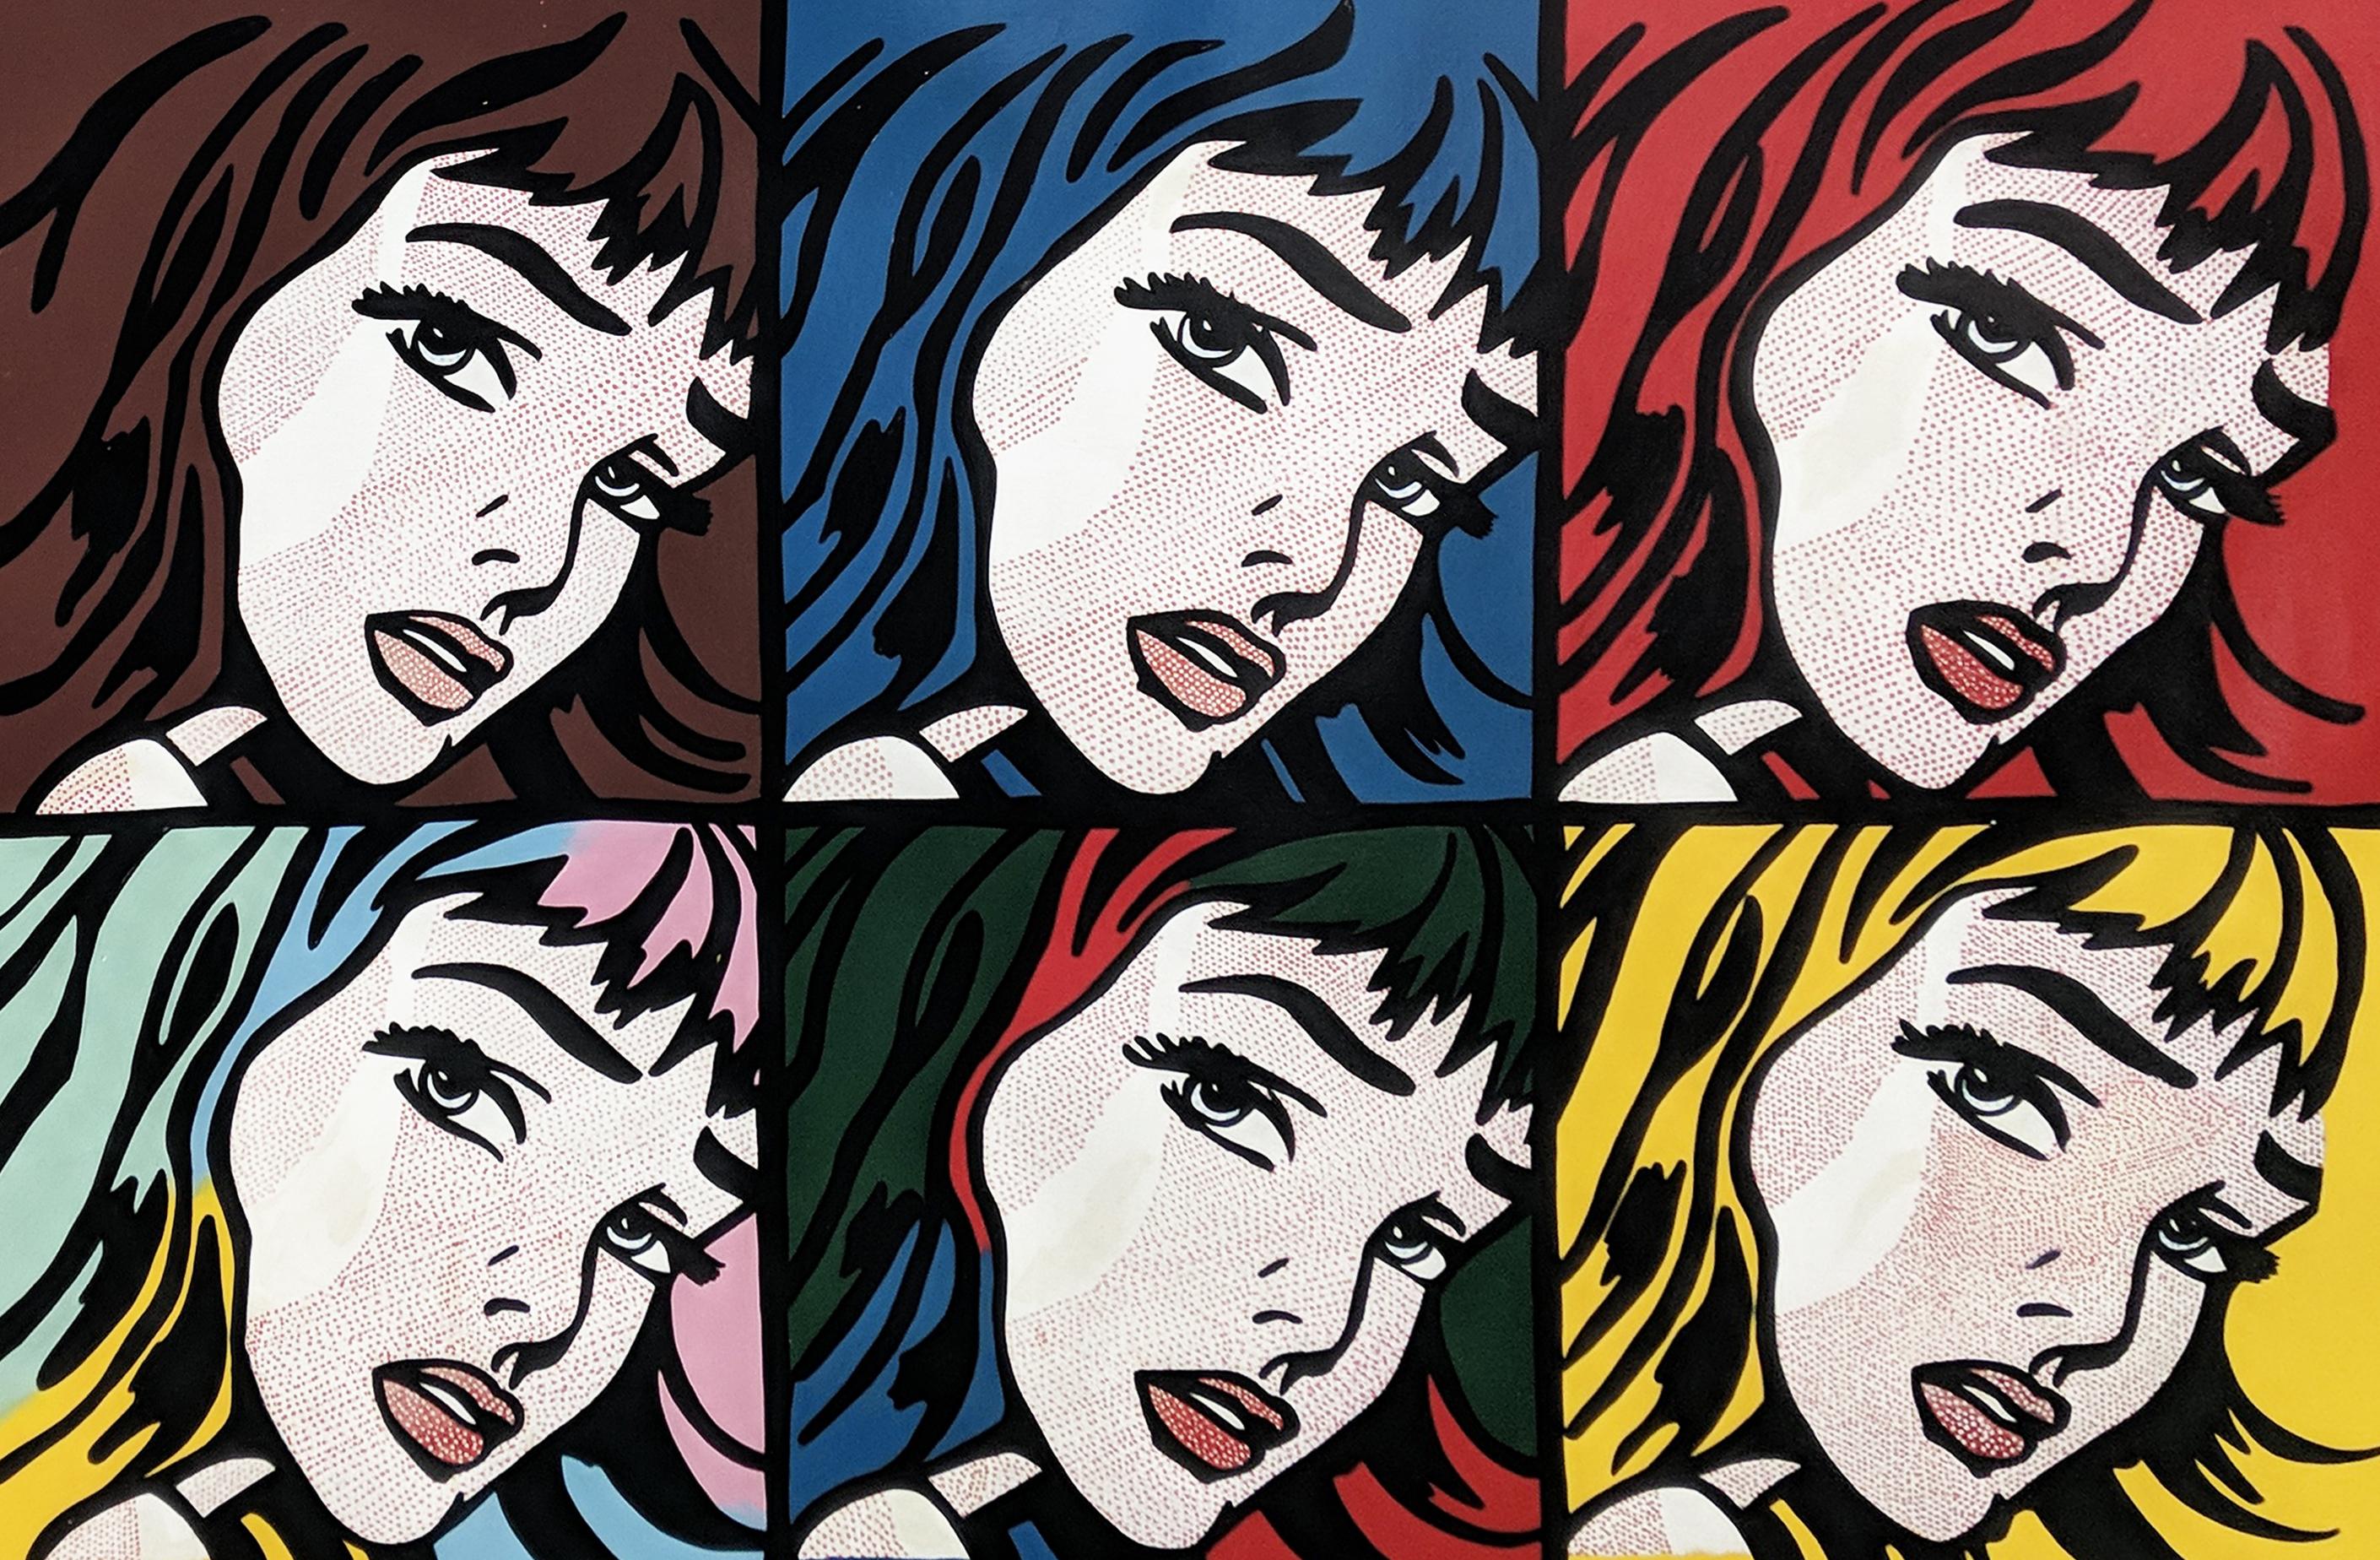 Why did Roy Lichtenstein paint The Crying Girl?